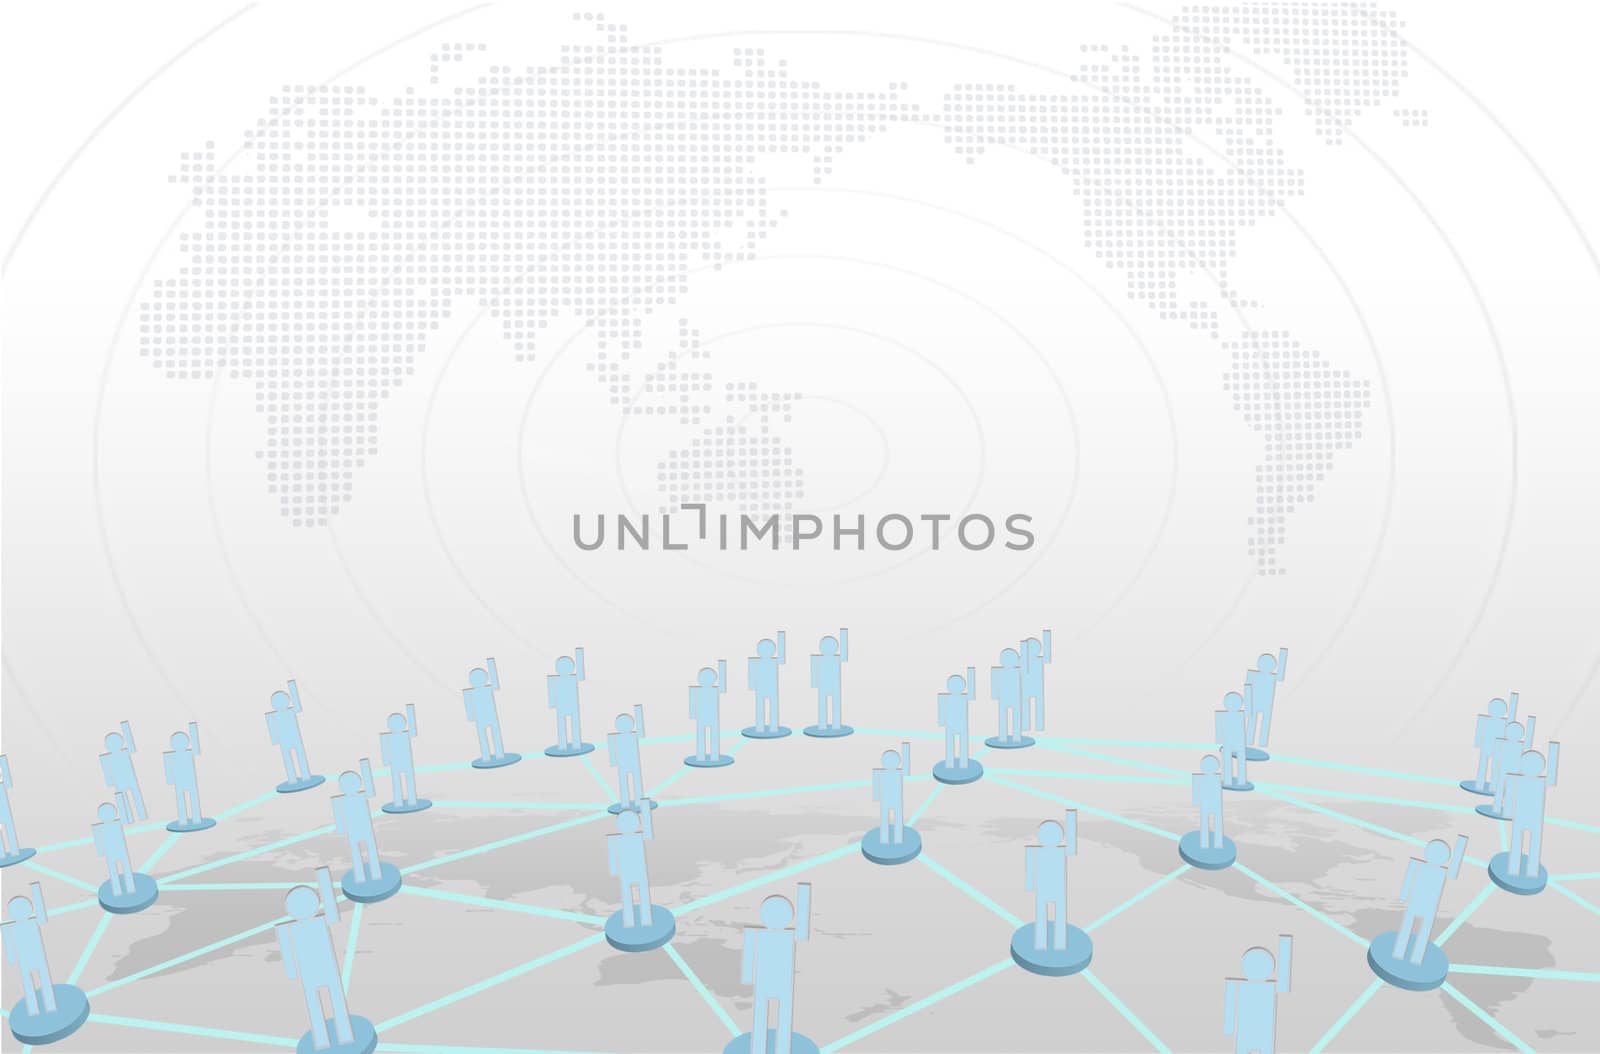 Social network concept: people over world map by rufous